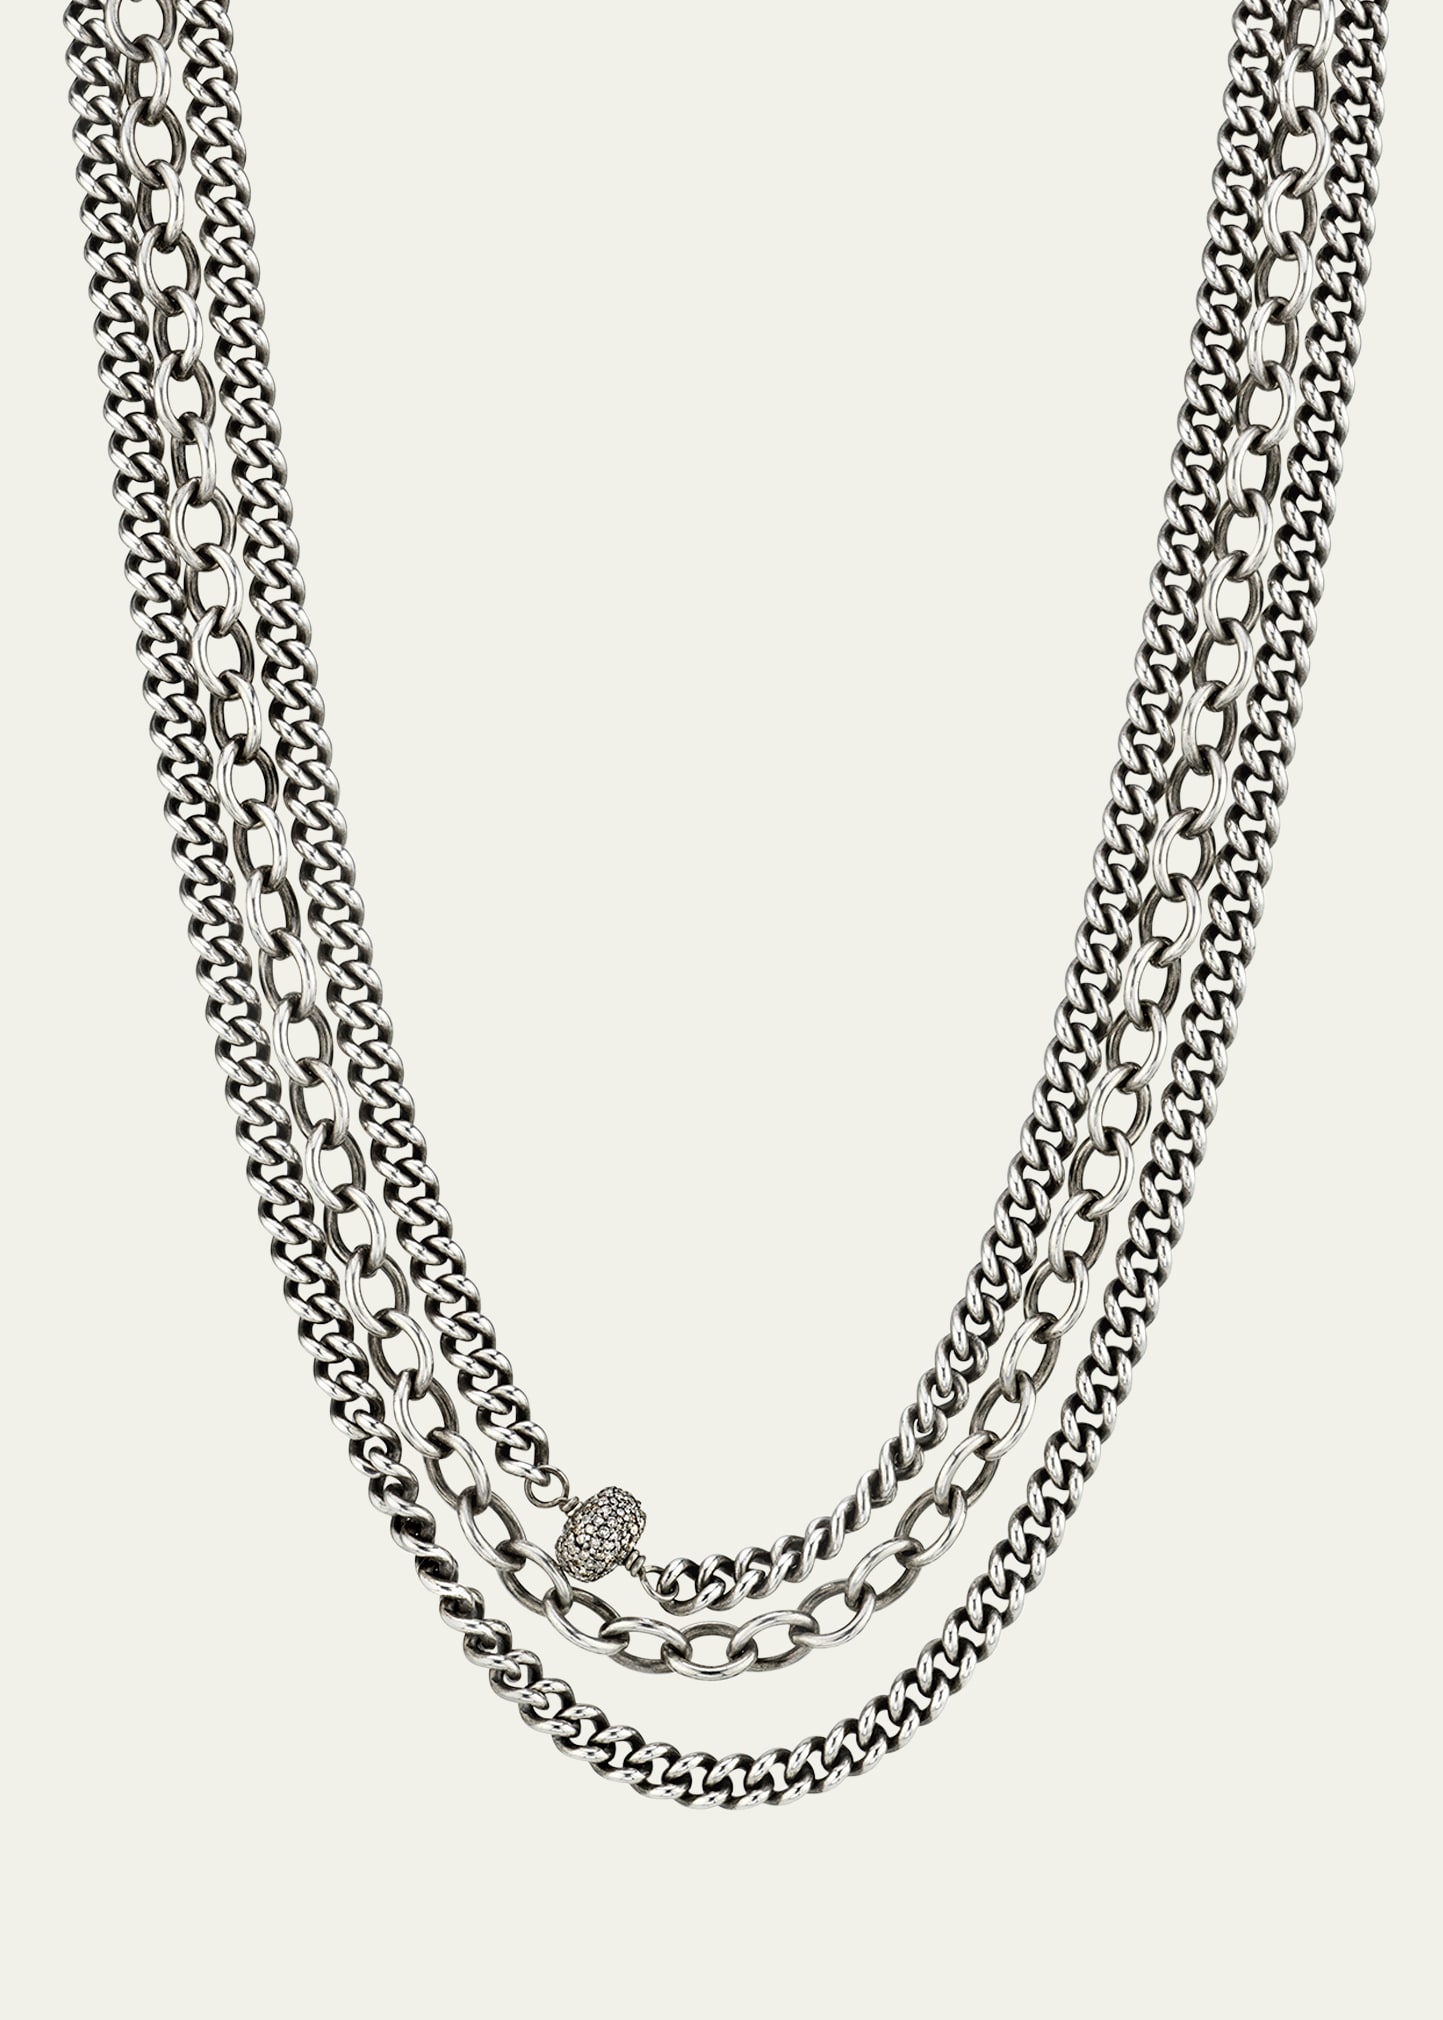 Triple Chain Necklace with 1 Pave Donut